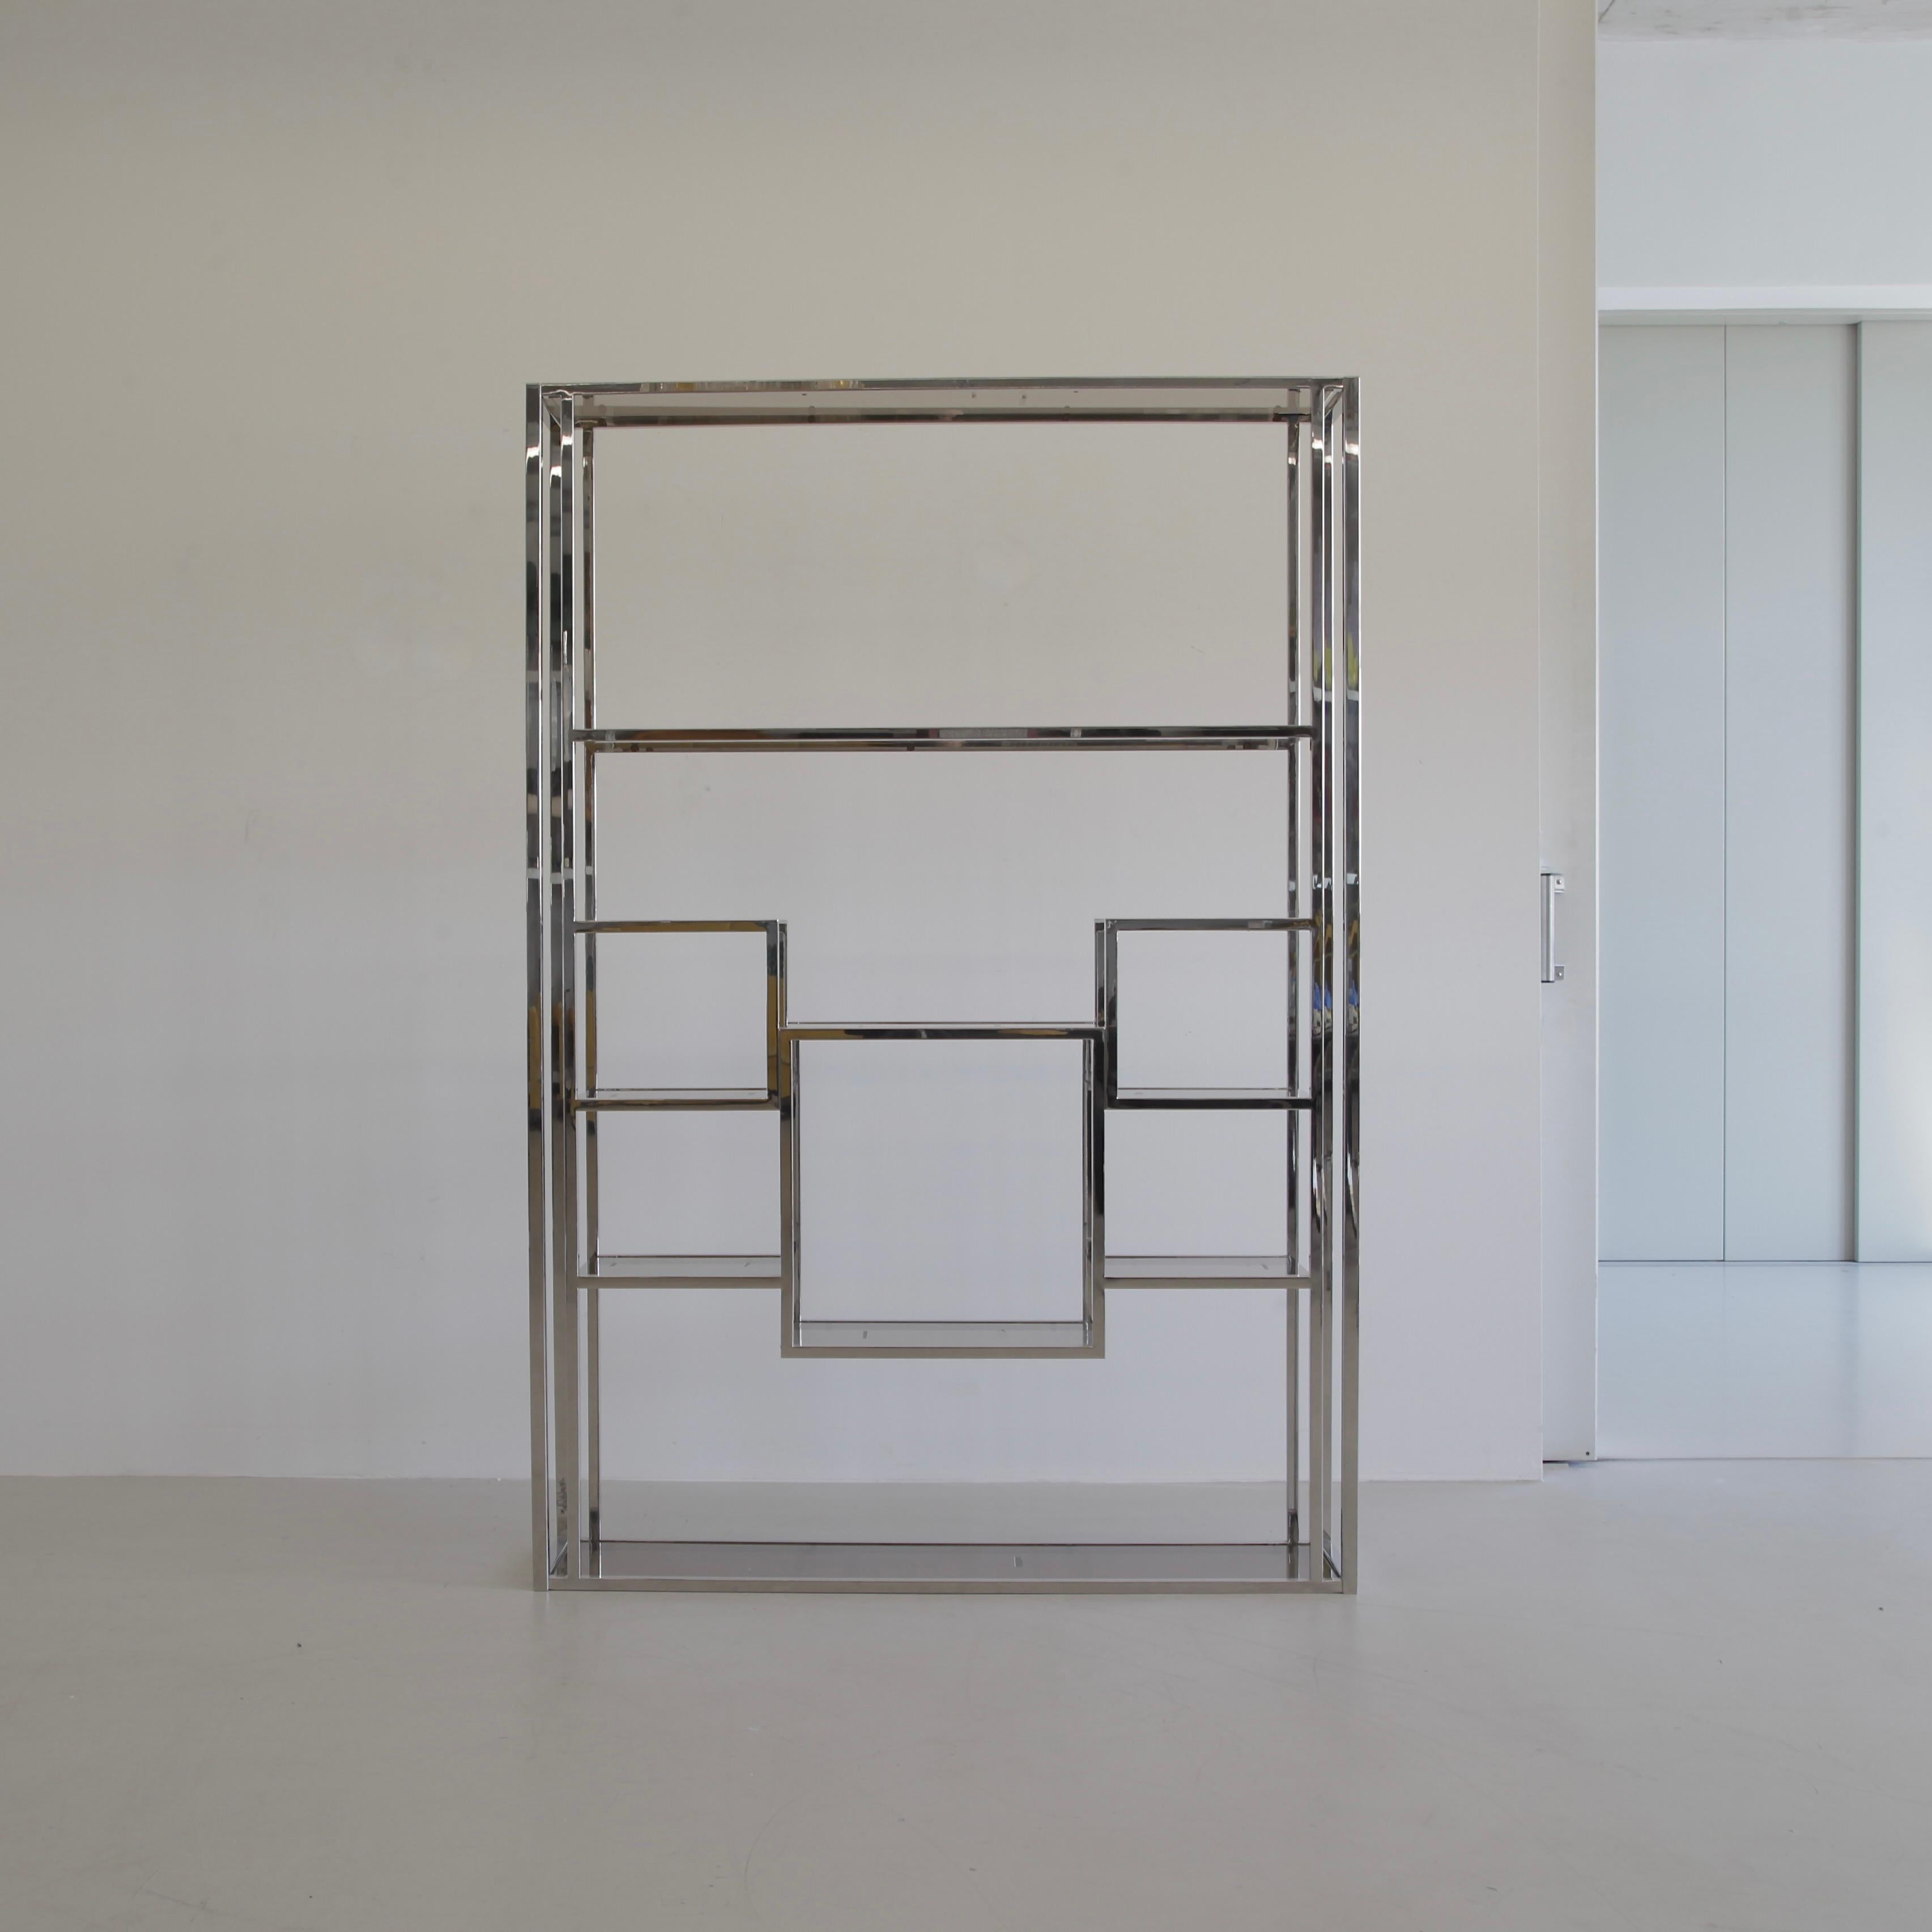 Library/ Room Divider, designed by Willy Rizzo. France, Willy Rizzo, 2012.

A large contemporary bookcase/ room divider made of polished stainless steel construction with smoked glass shelves on different levels. The frame has been signed by Willy